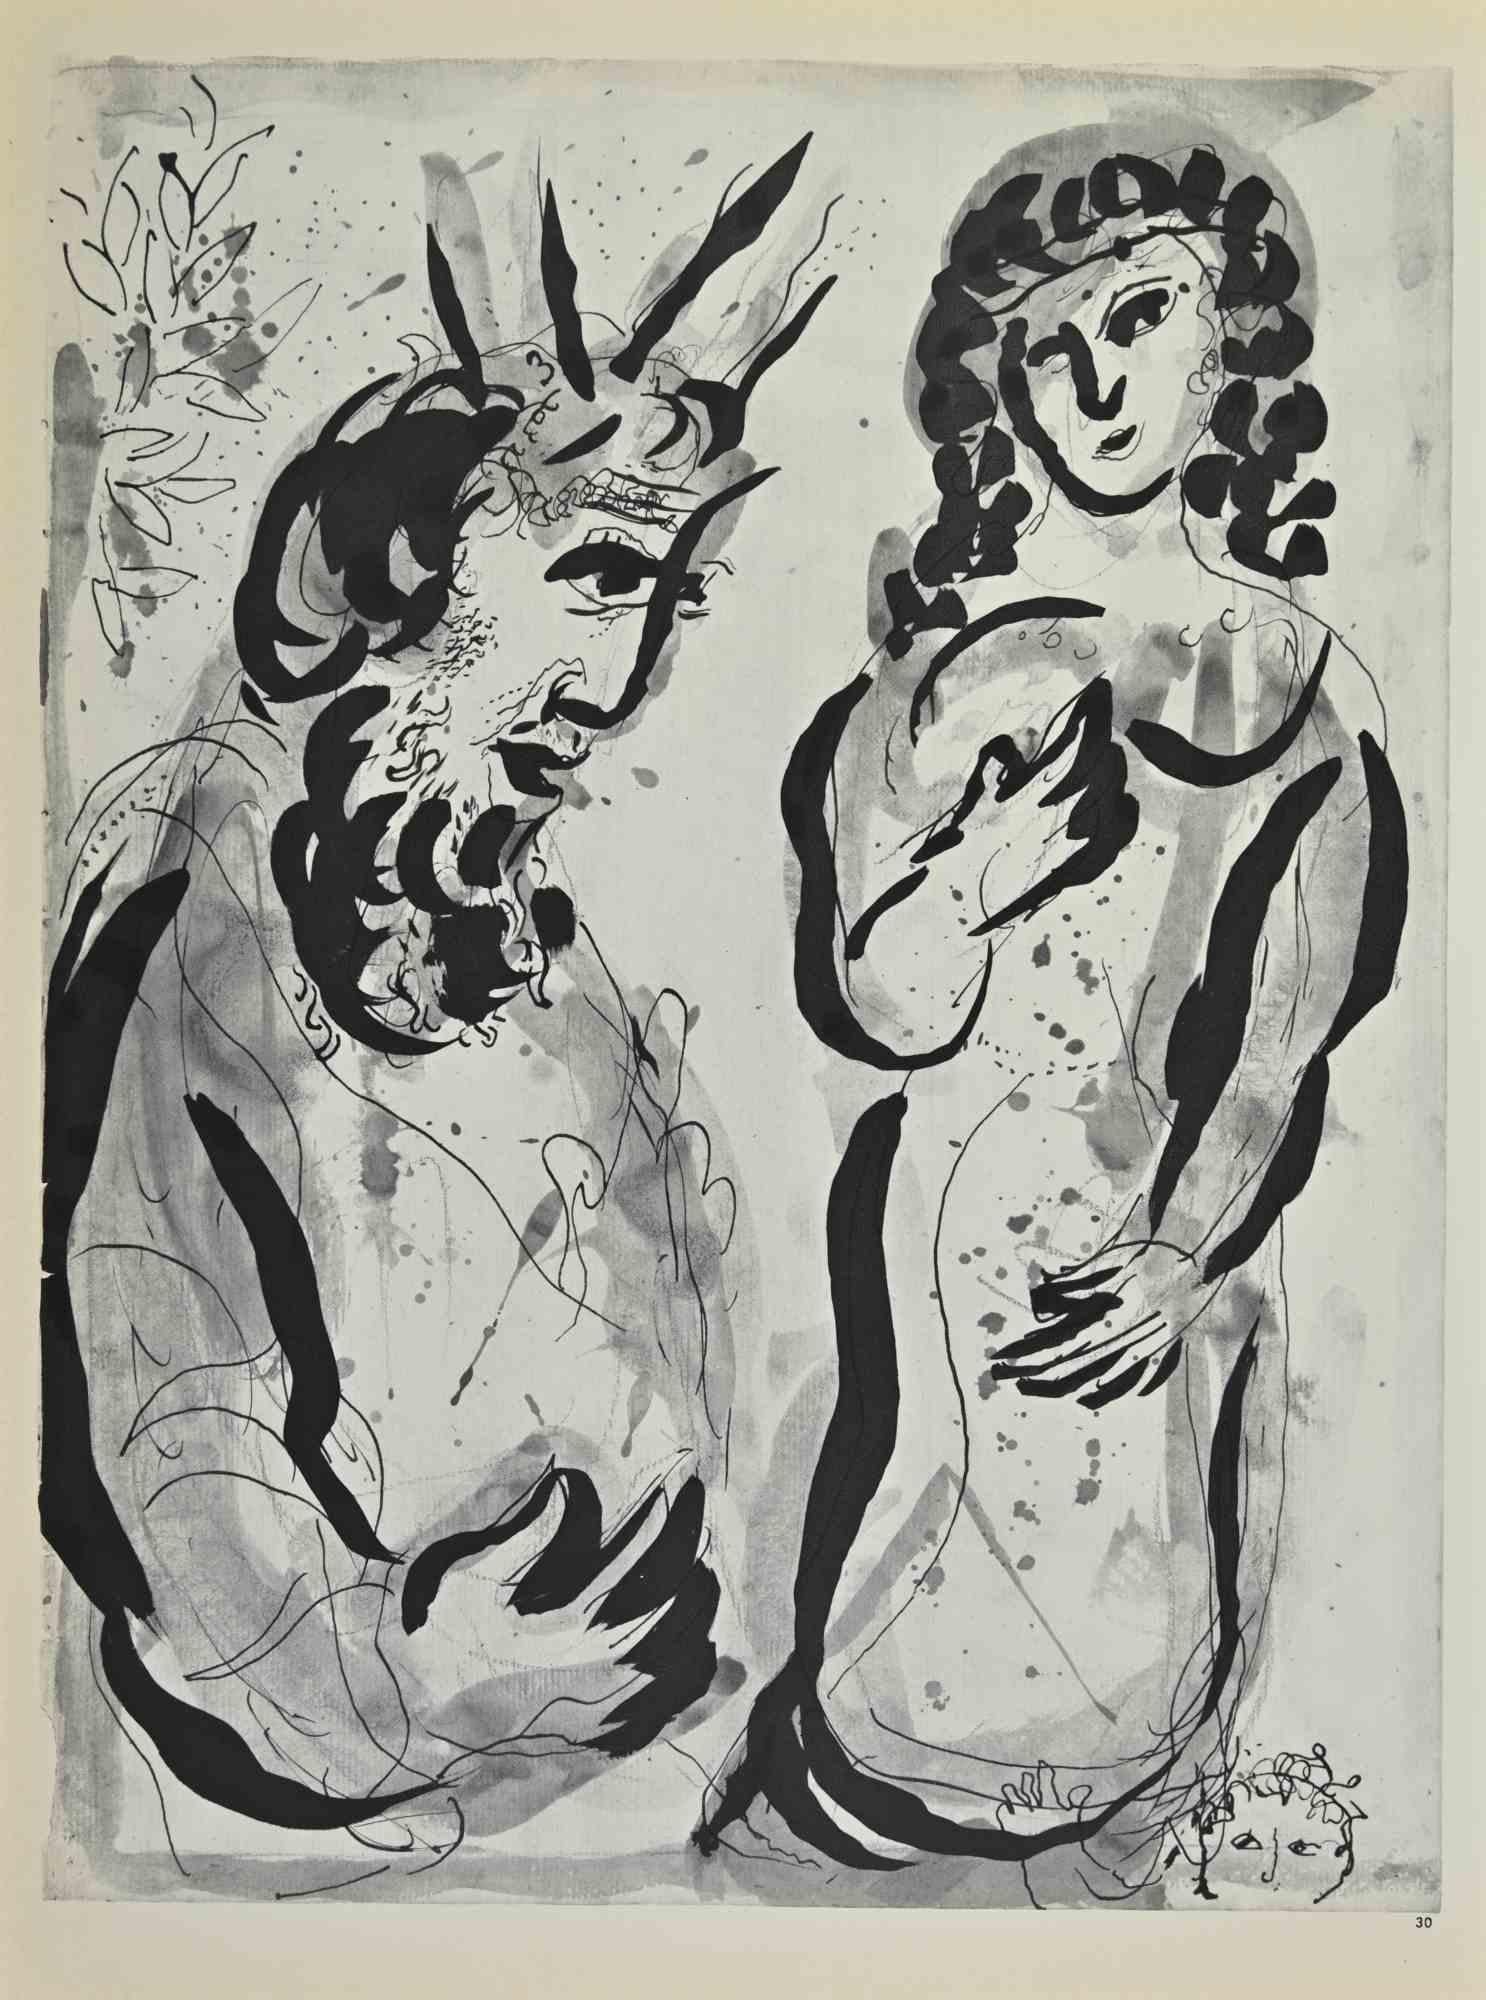 Pharoah and the Hebrew Midwives  is an artwork realized by March Chagall, 1960s.

Lithograph on brown-toned paper, no signature.

Lithograph on both sheets.

Edition of 6500 unsigned lithographs. Printed by Mourlot and published by Tériade,